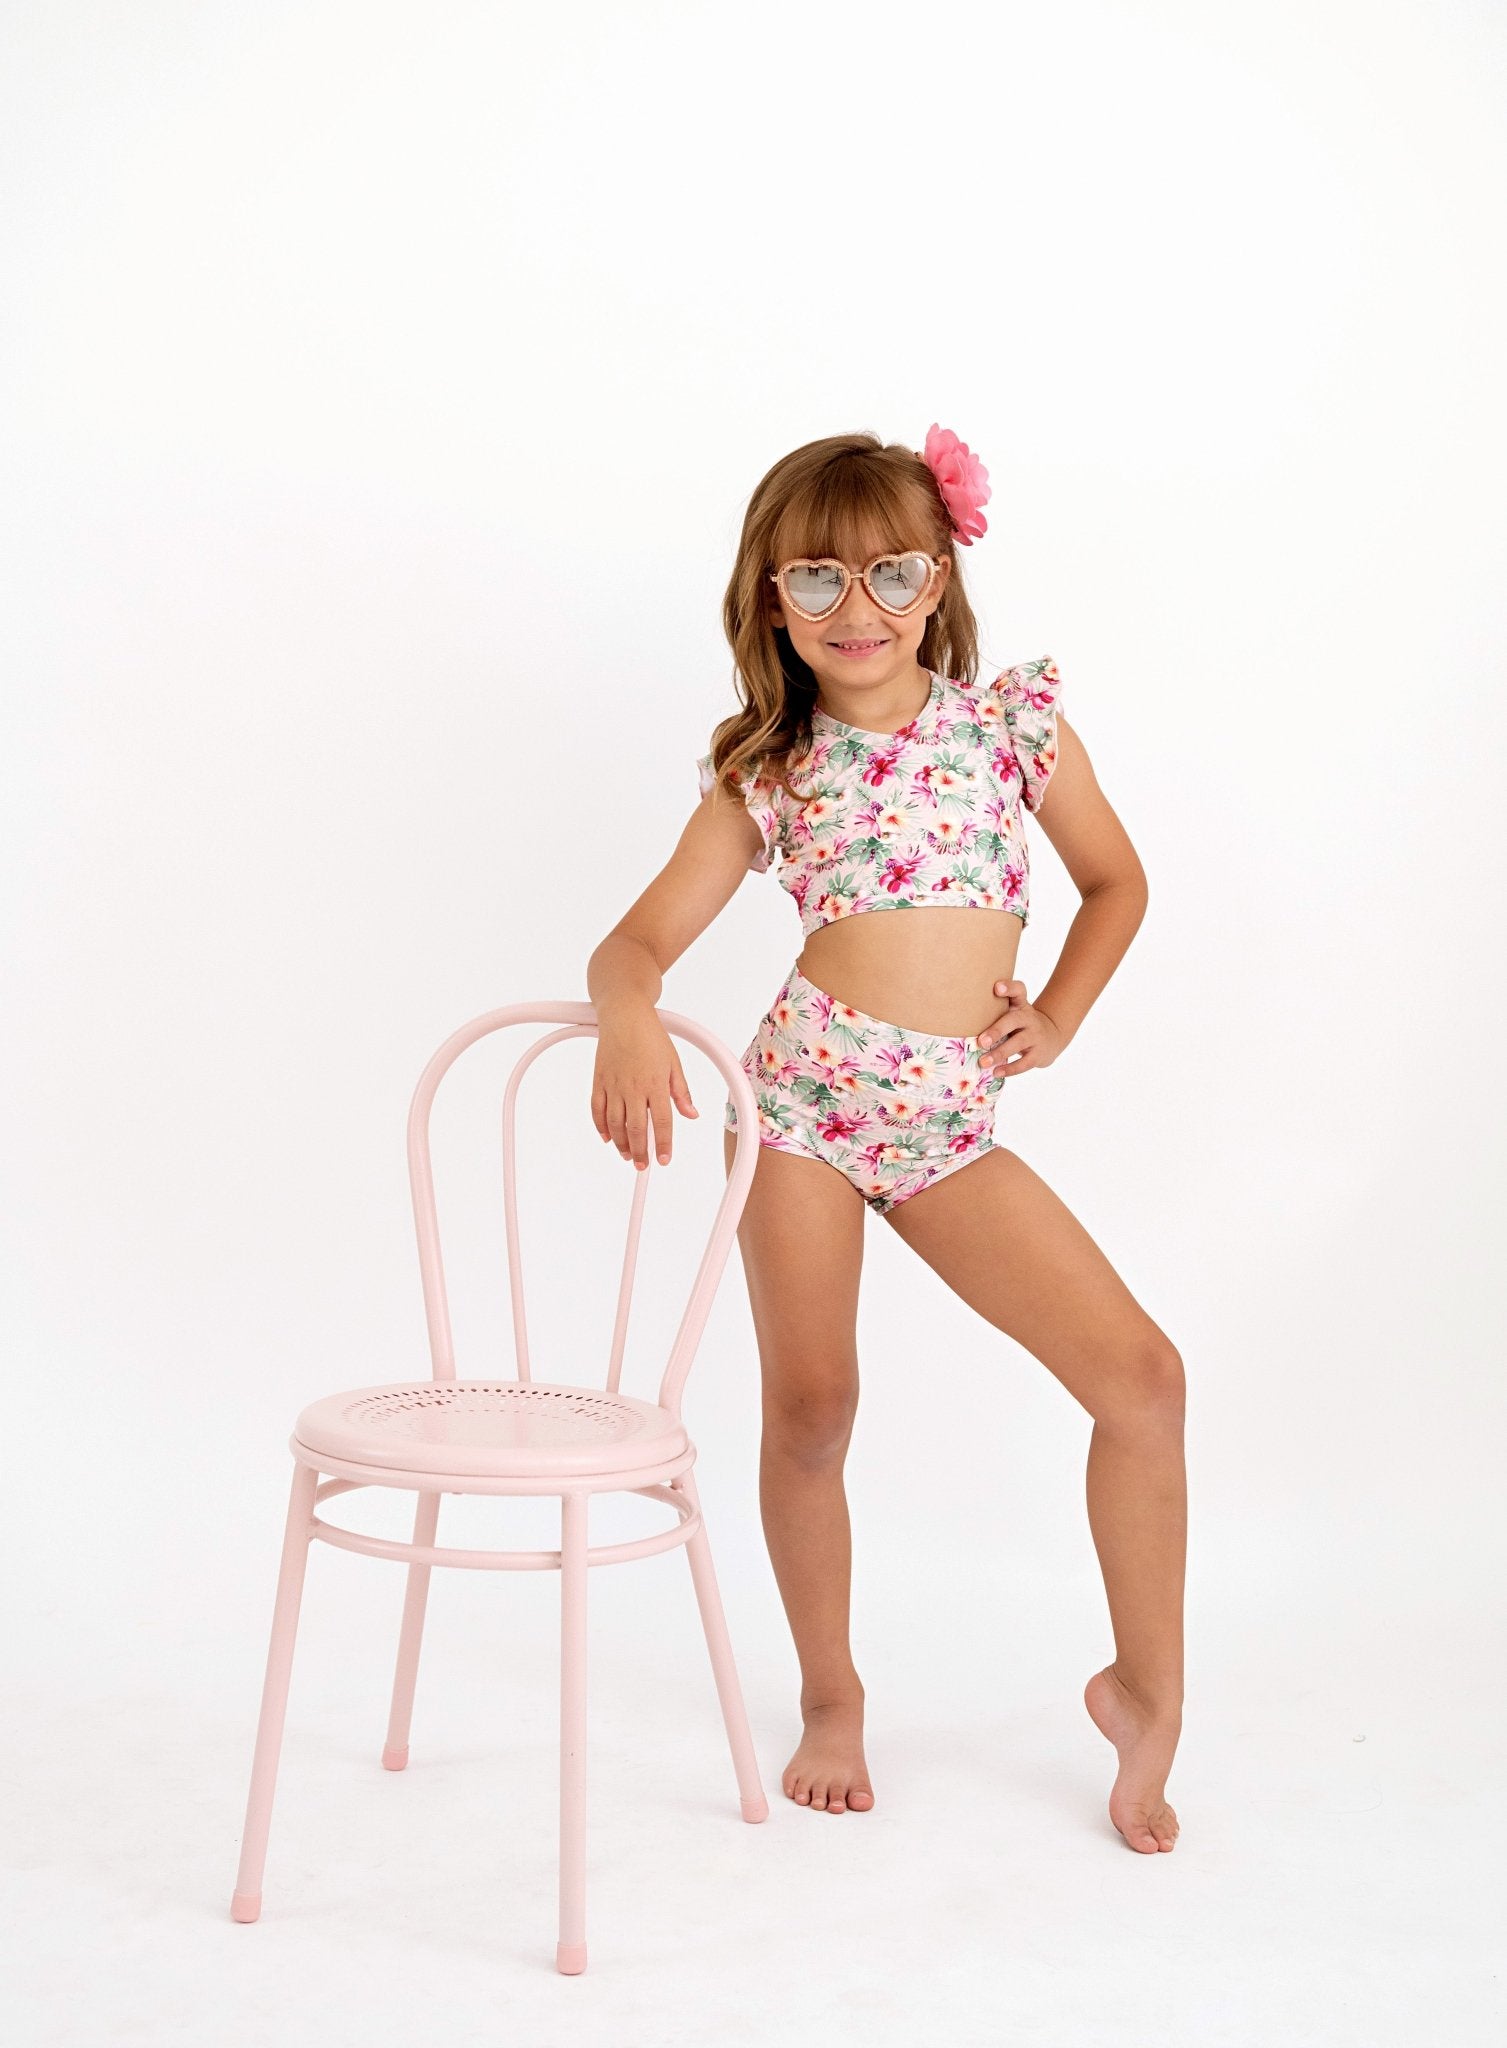 Tropical Dreams Pink Printed Swimsuit - Evie's Closet Clothing